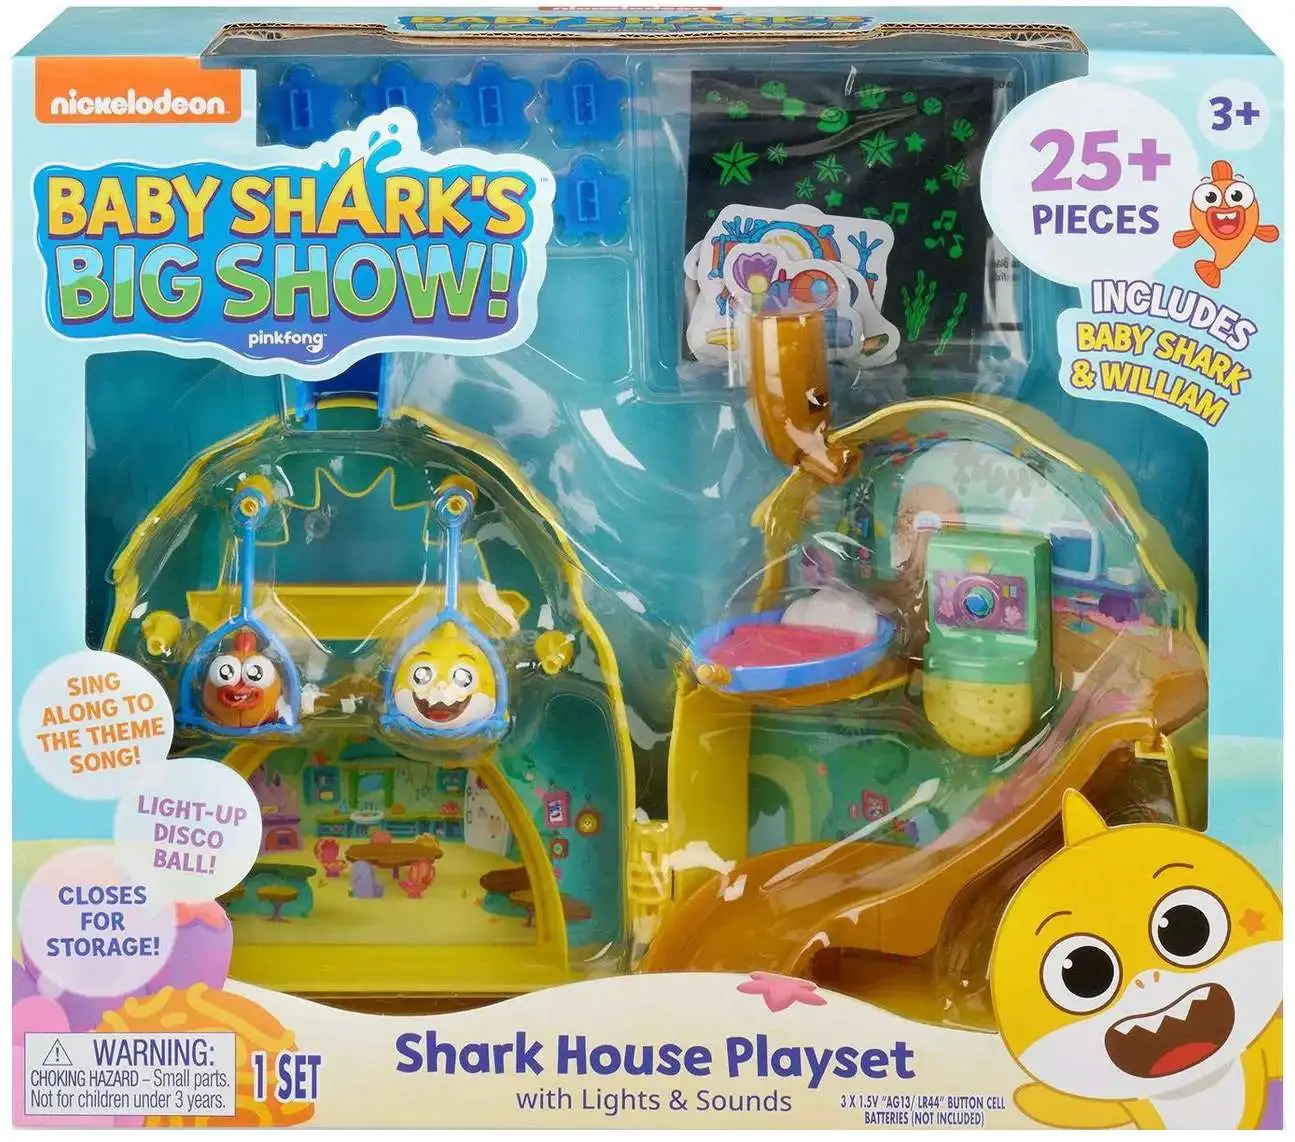 Baby Sharks Big Show Shark House Playset 25 Pieces includes Baby Shark  William WowWee - ToyWiz